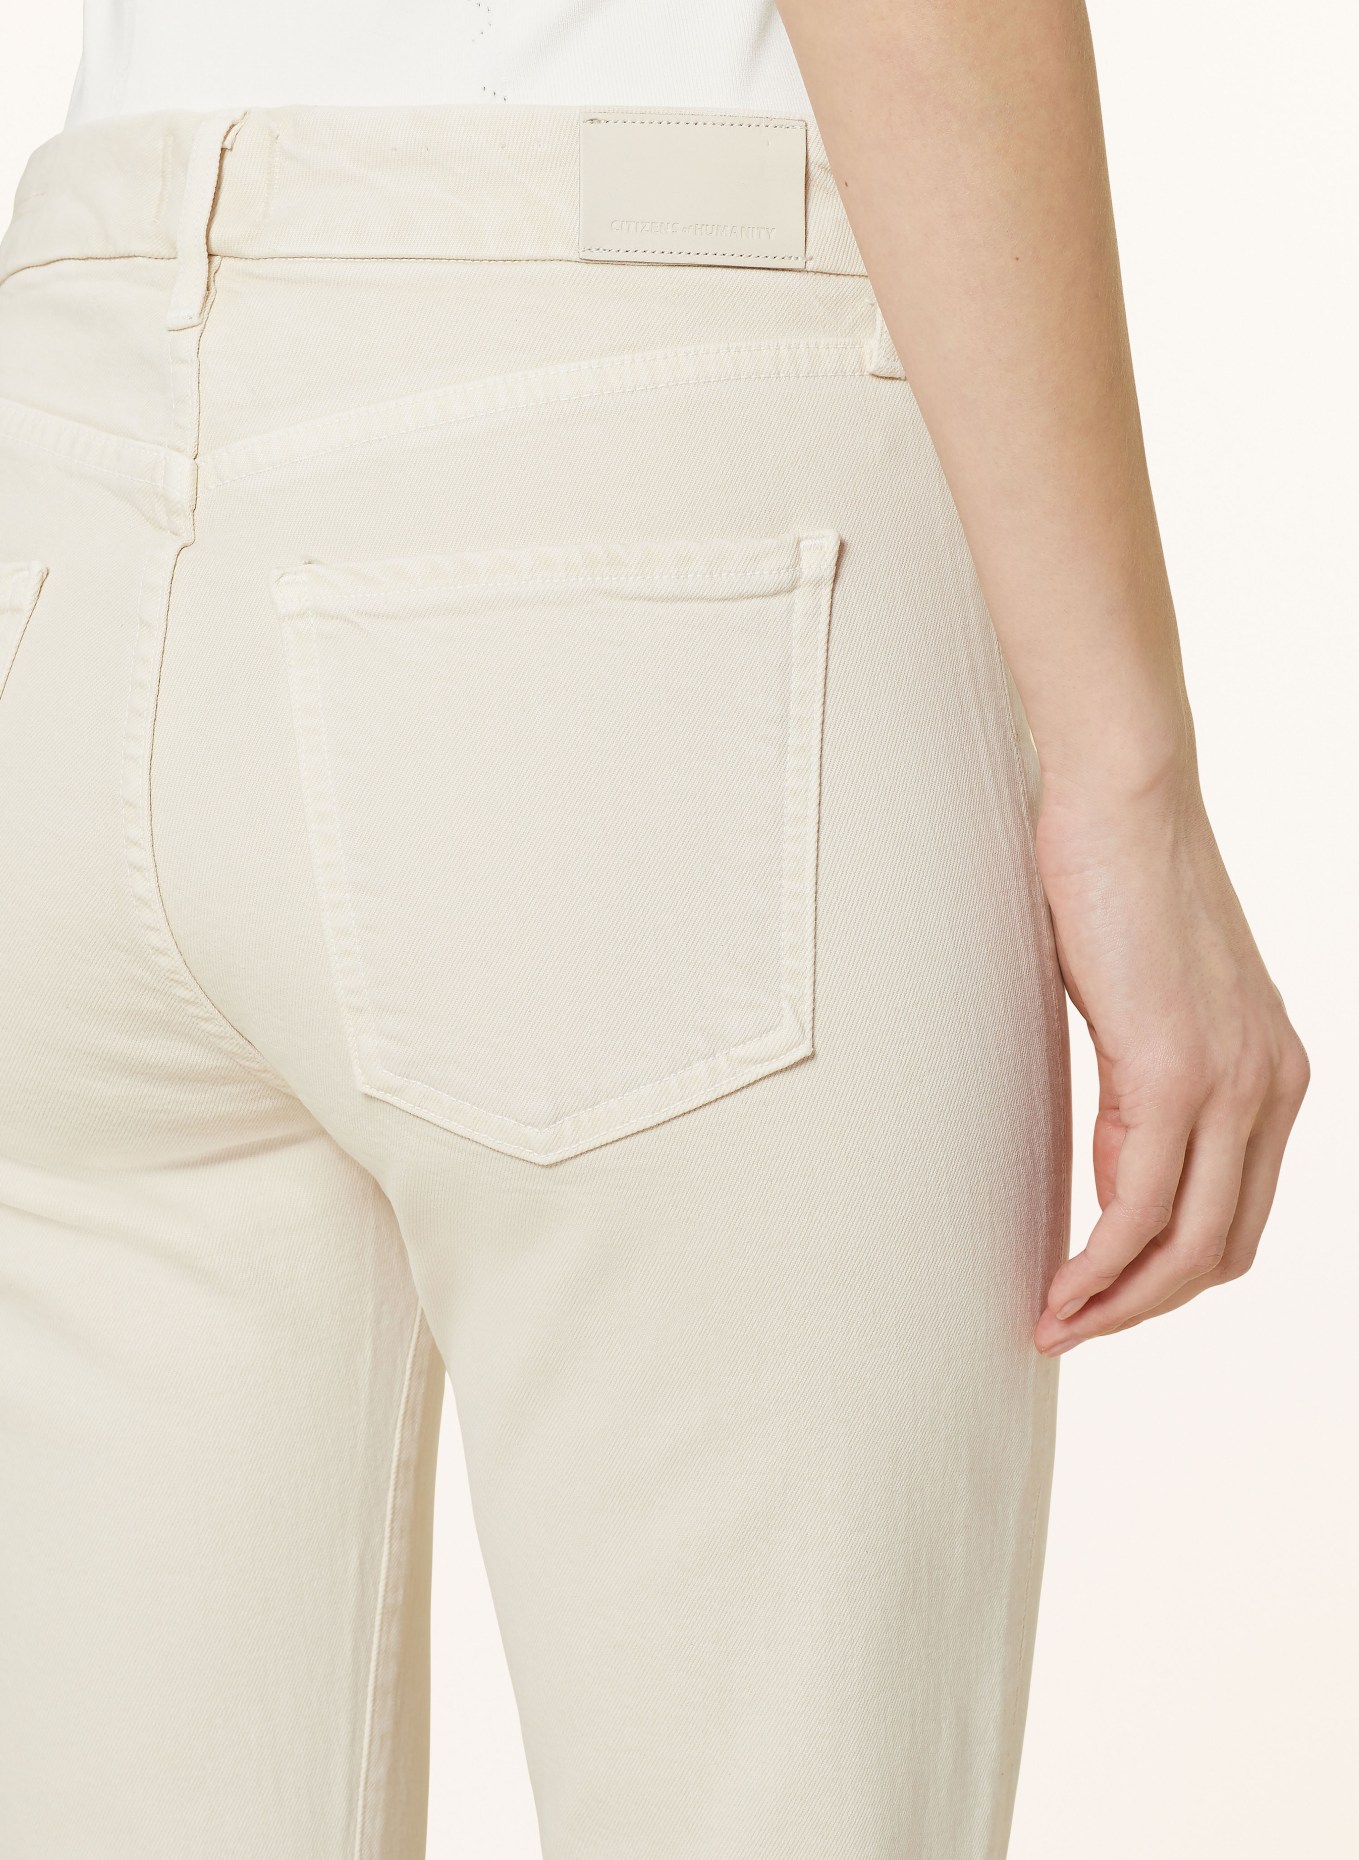 CITIZENS of HUMANITY 7/8-Jeans ISOLA, Farbe: almondette med/light brown (Bild 5)